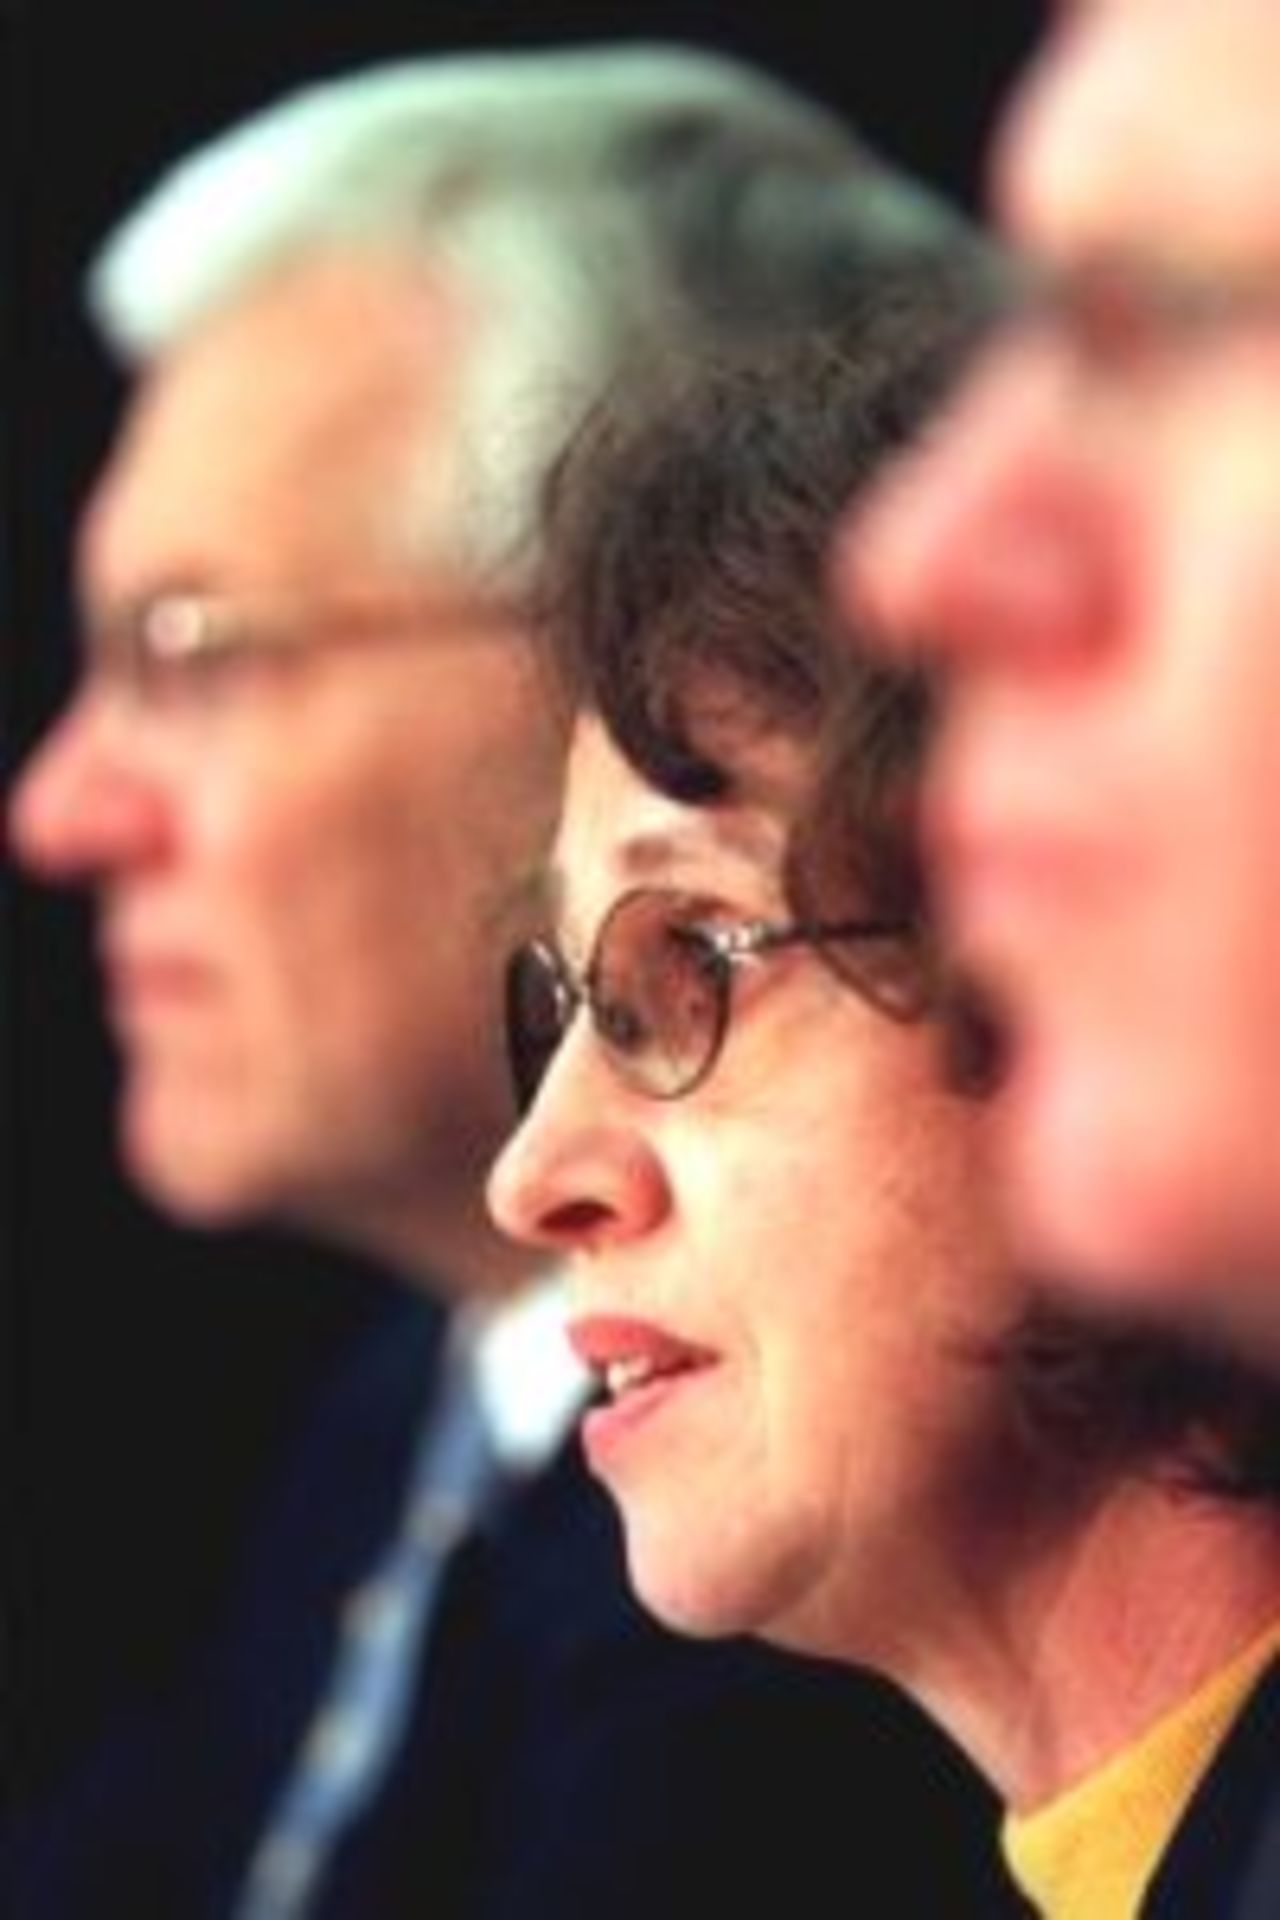 18 Jul 2000: Professor Jan McMillen, the Executive Director of the Australian Institute of Gambling Research addresses today's media conference, surrounded by Malcolm Speed, CEO of the Australian Cricket Board, and Wayne Jackson, CEO of the Australian Football League, held at the MCG, Melbourne, Australia.